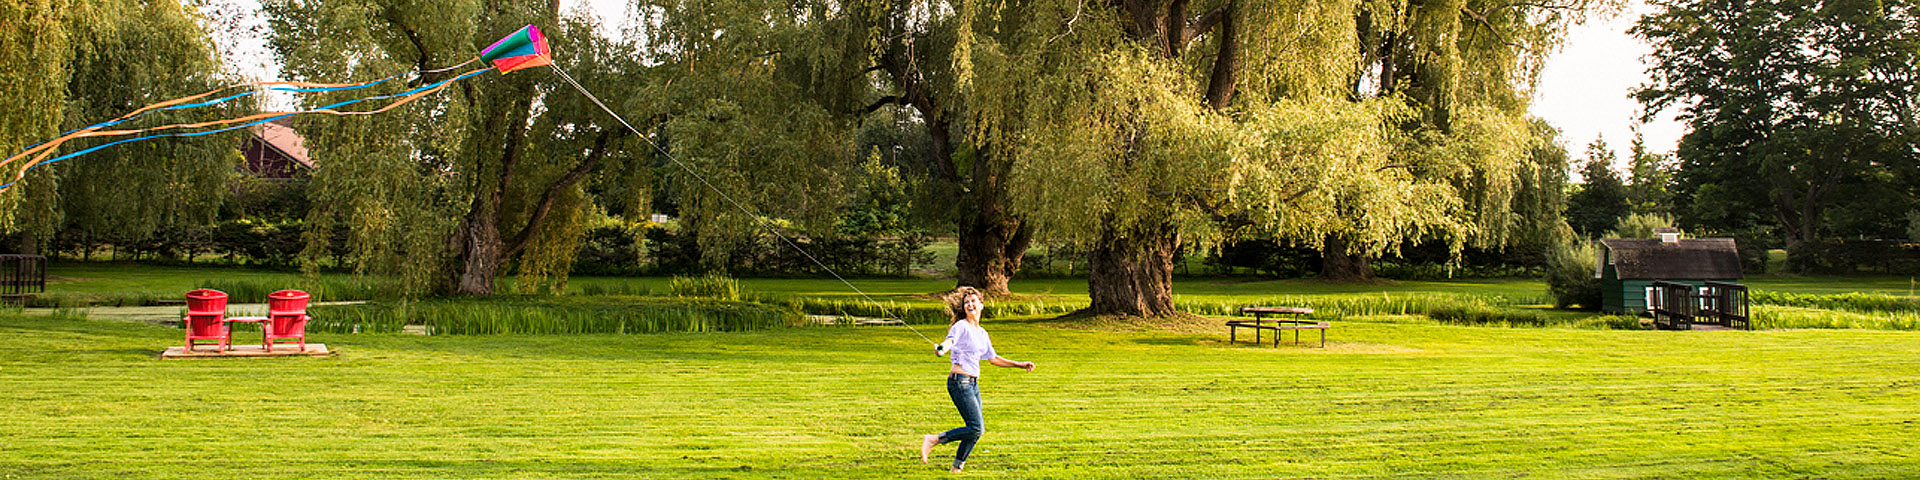 A woman flies a kite in the victorian garden at Grand-Pré National Historic Site.